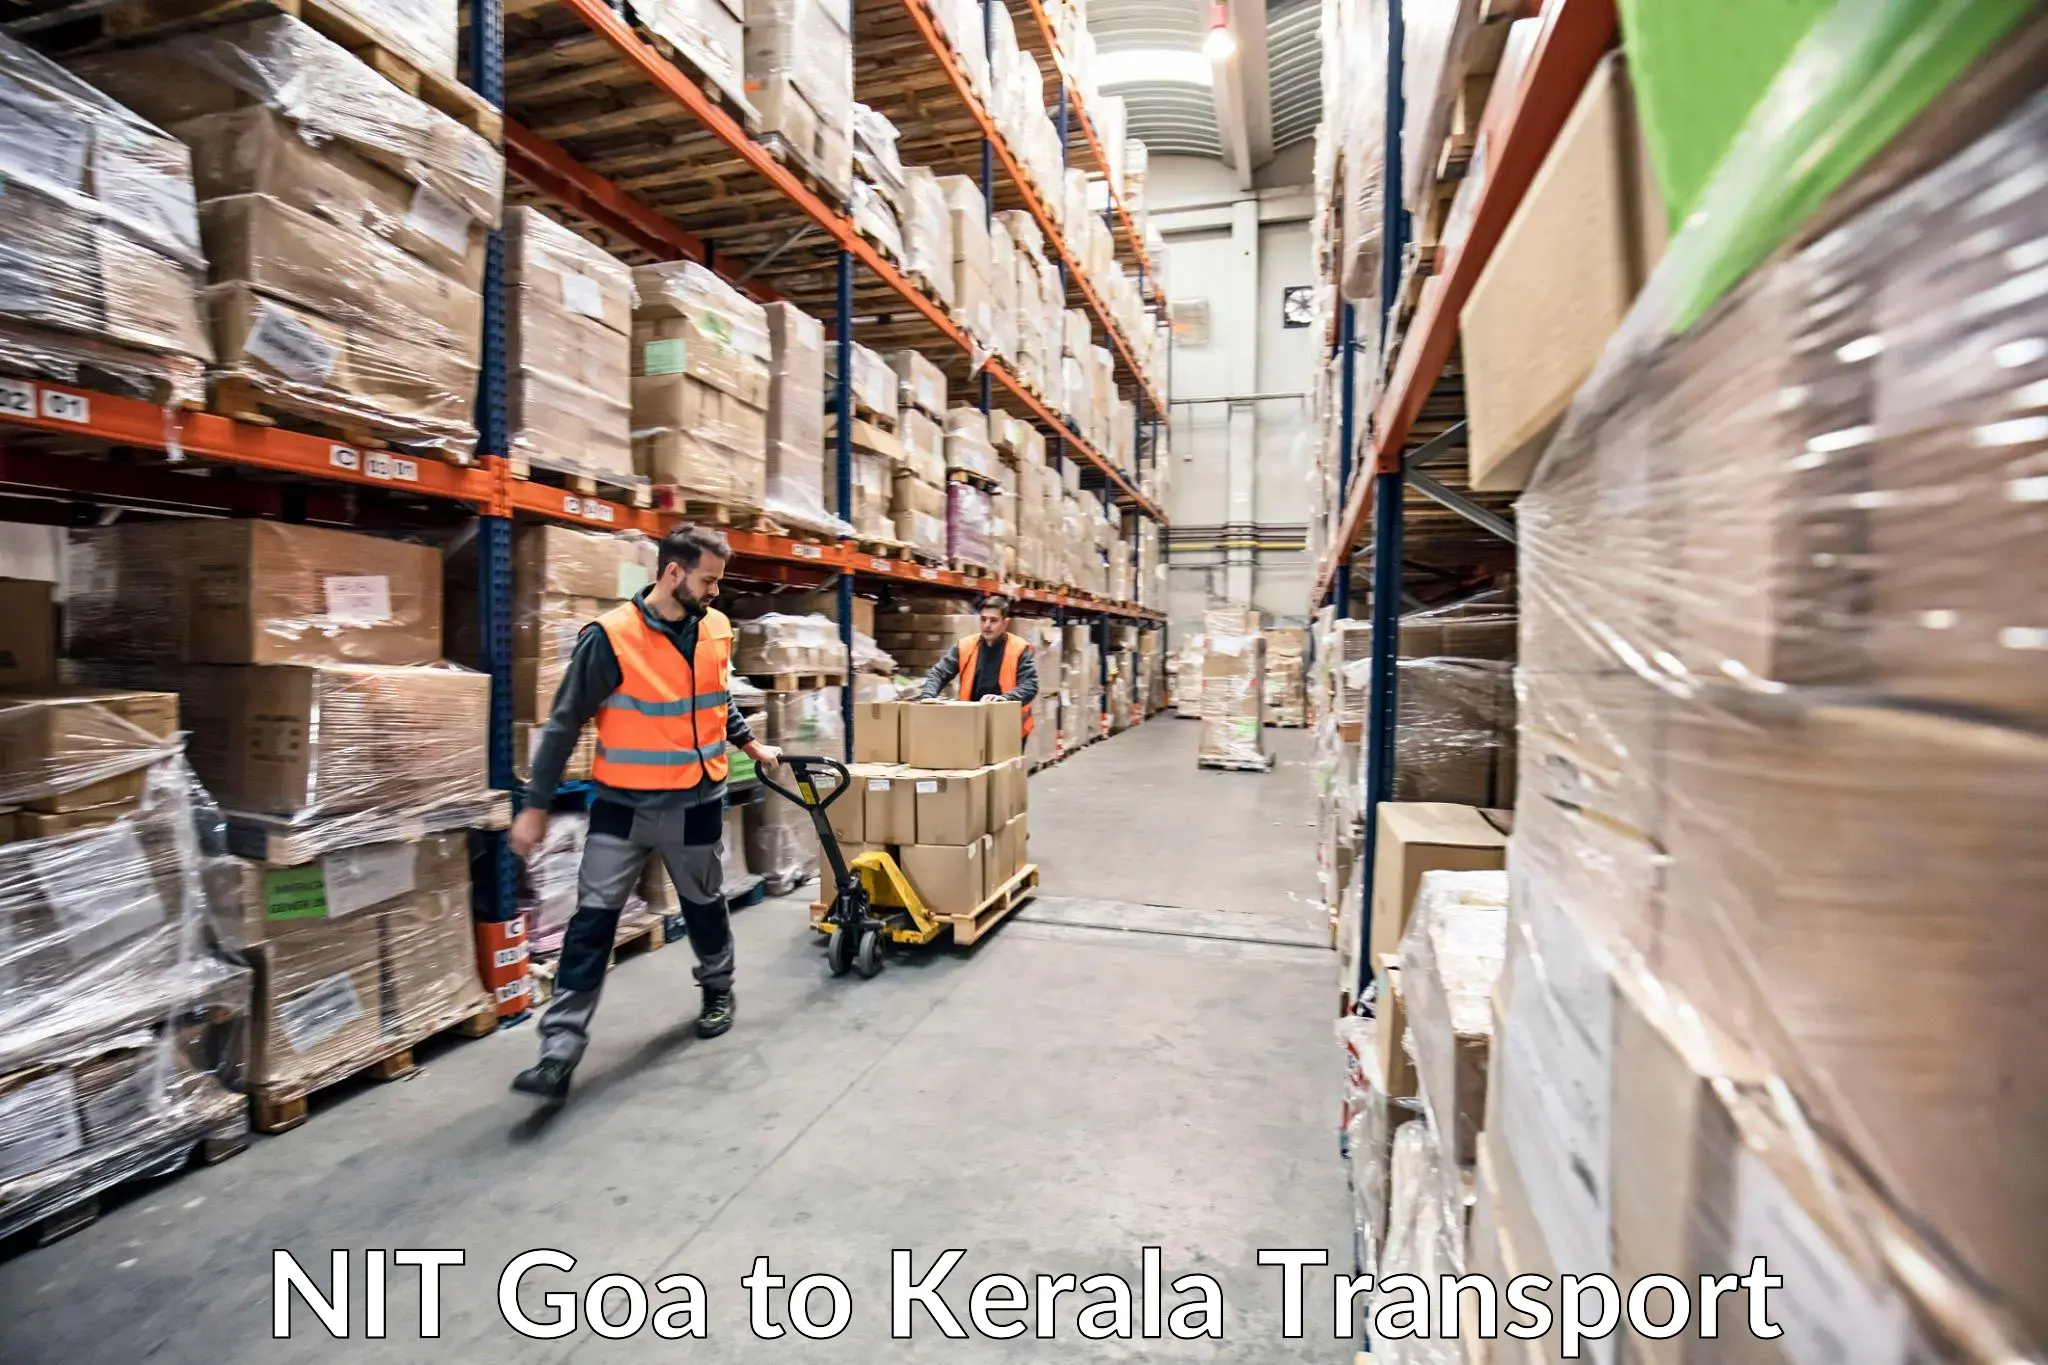 Road transport services in NIT Goa to Kerala